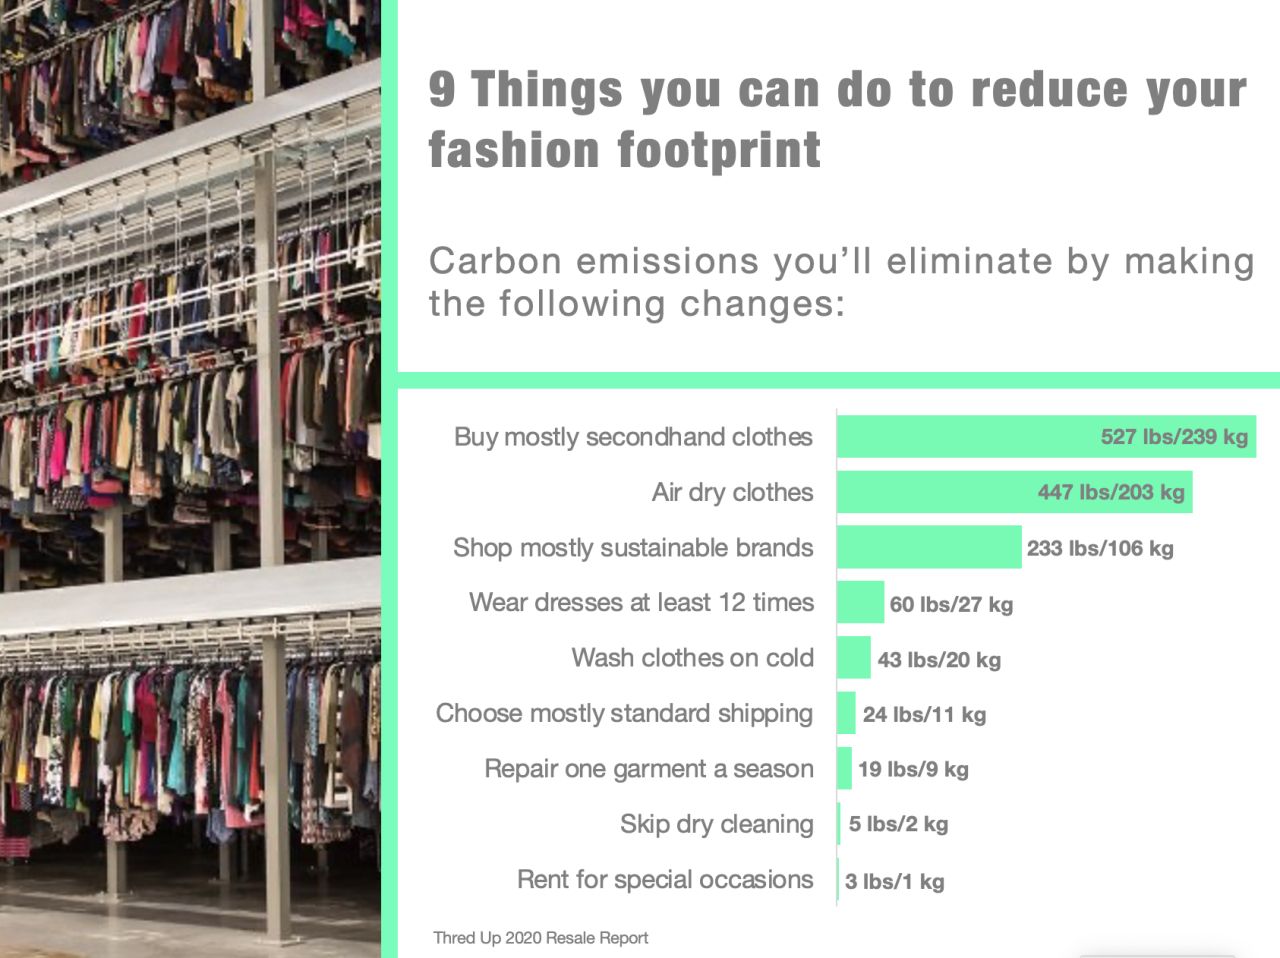 9_Things_You_Can_do_to_Reduce_Your_Fashion_Footprint-min.jpeg